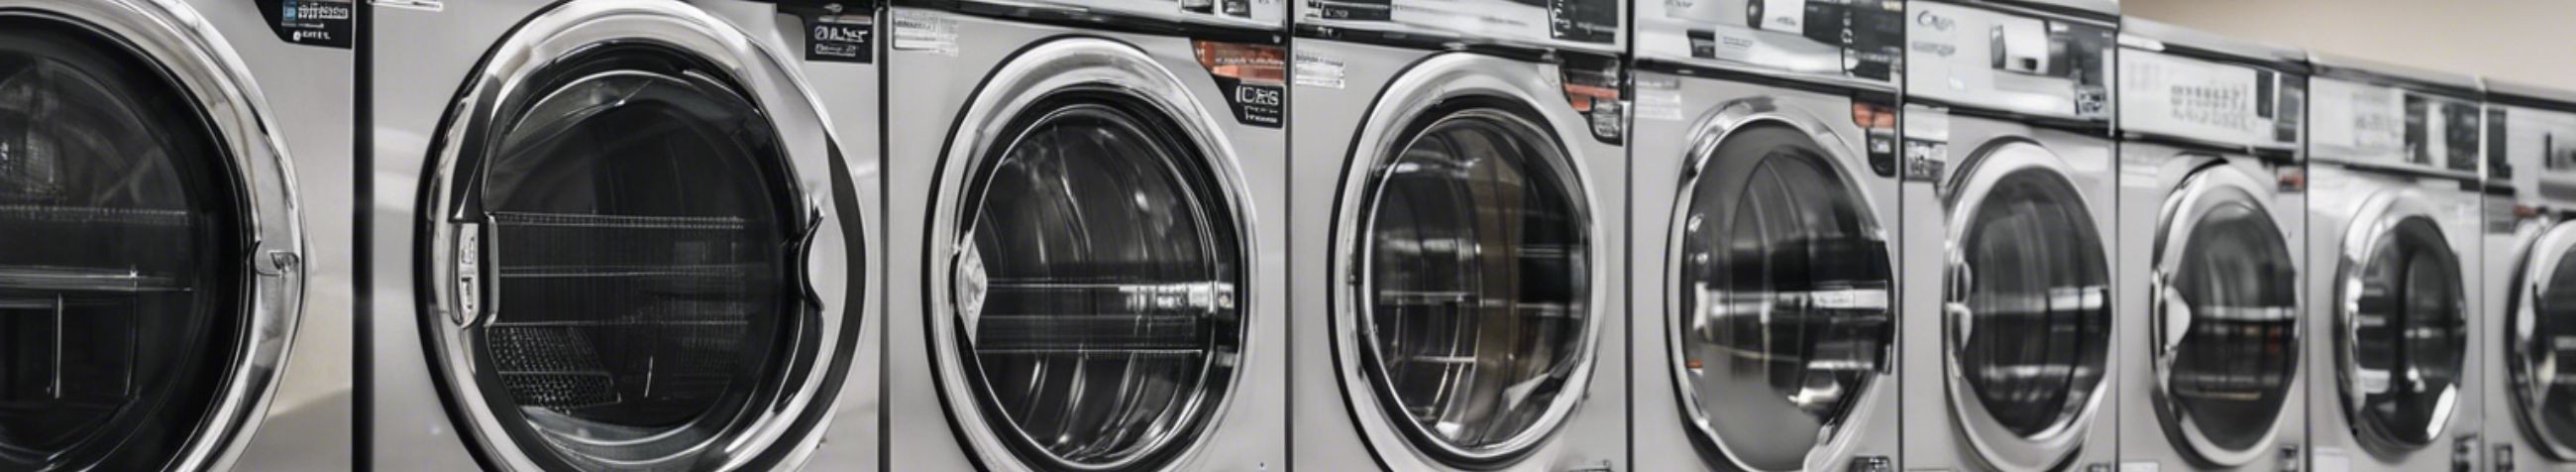 We specialize in the maintenance and repair of washing house equipment, offering our expertise not only to laundromats but also to other businesses in need of our services.